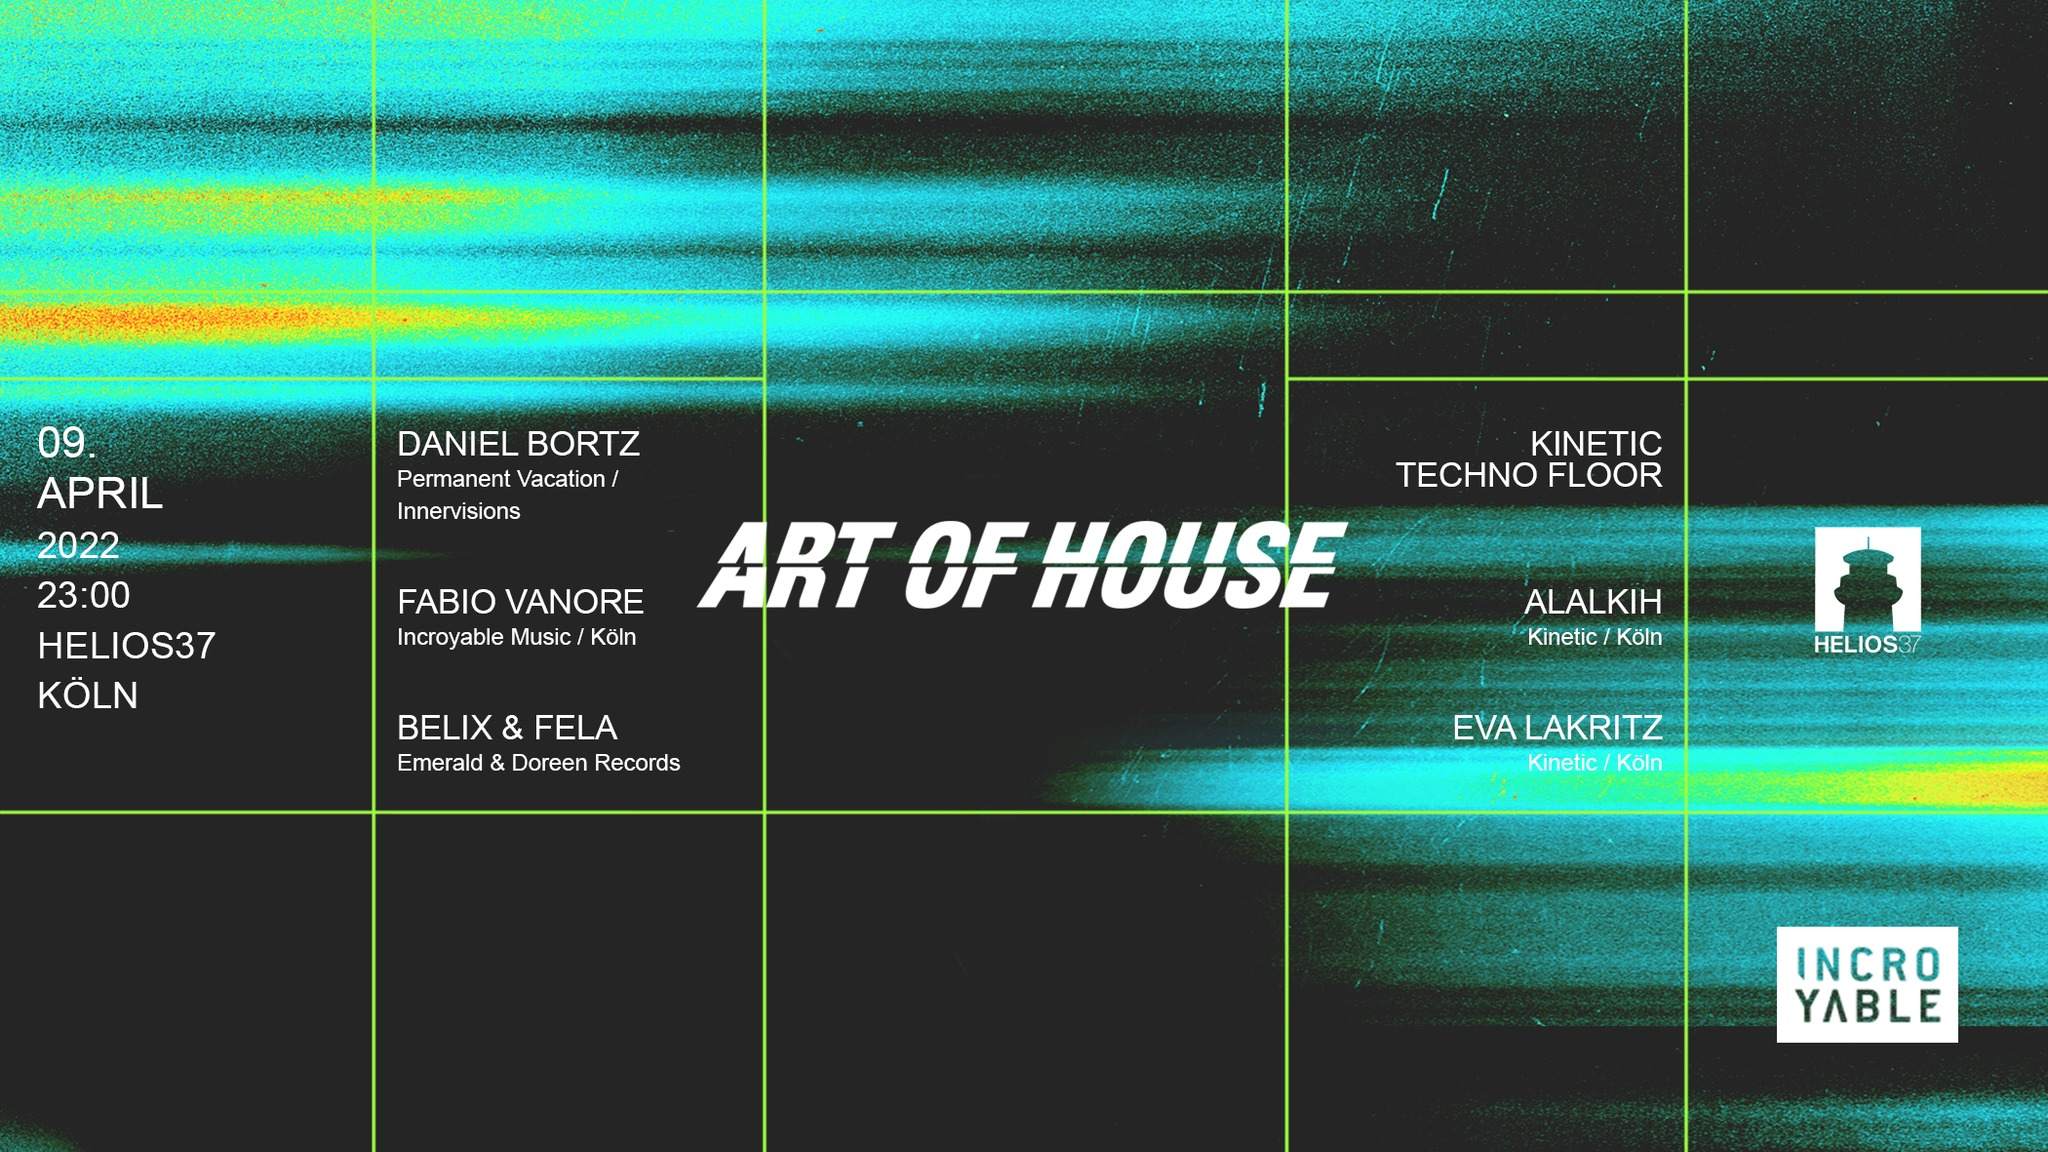 Art of House with DANIEL BORTZ (Innervisions) X Kinetic - Página frontal